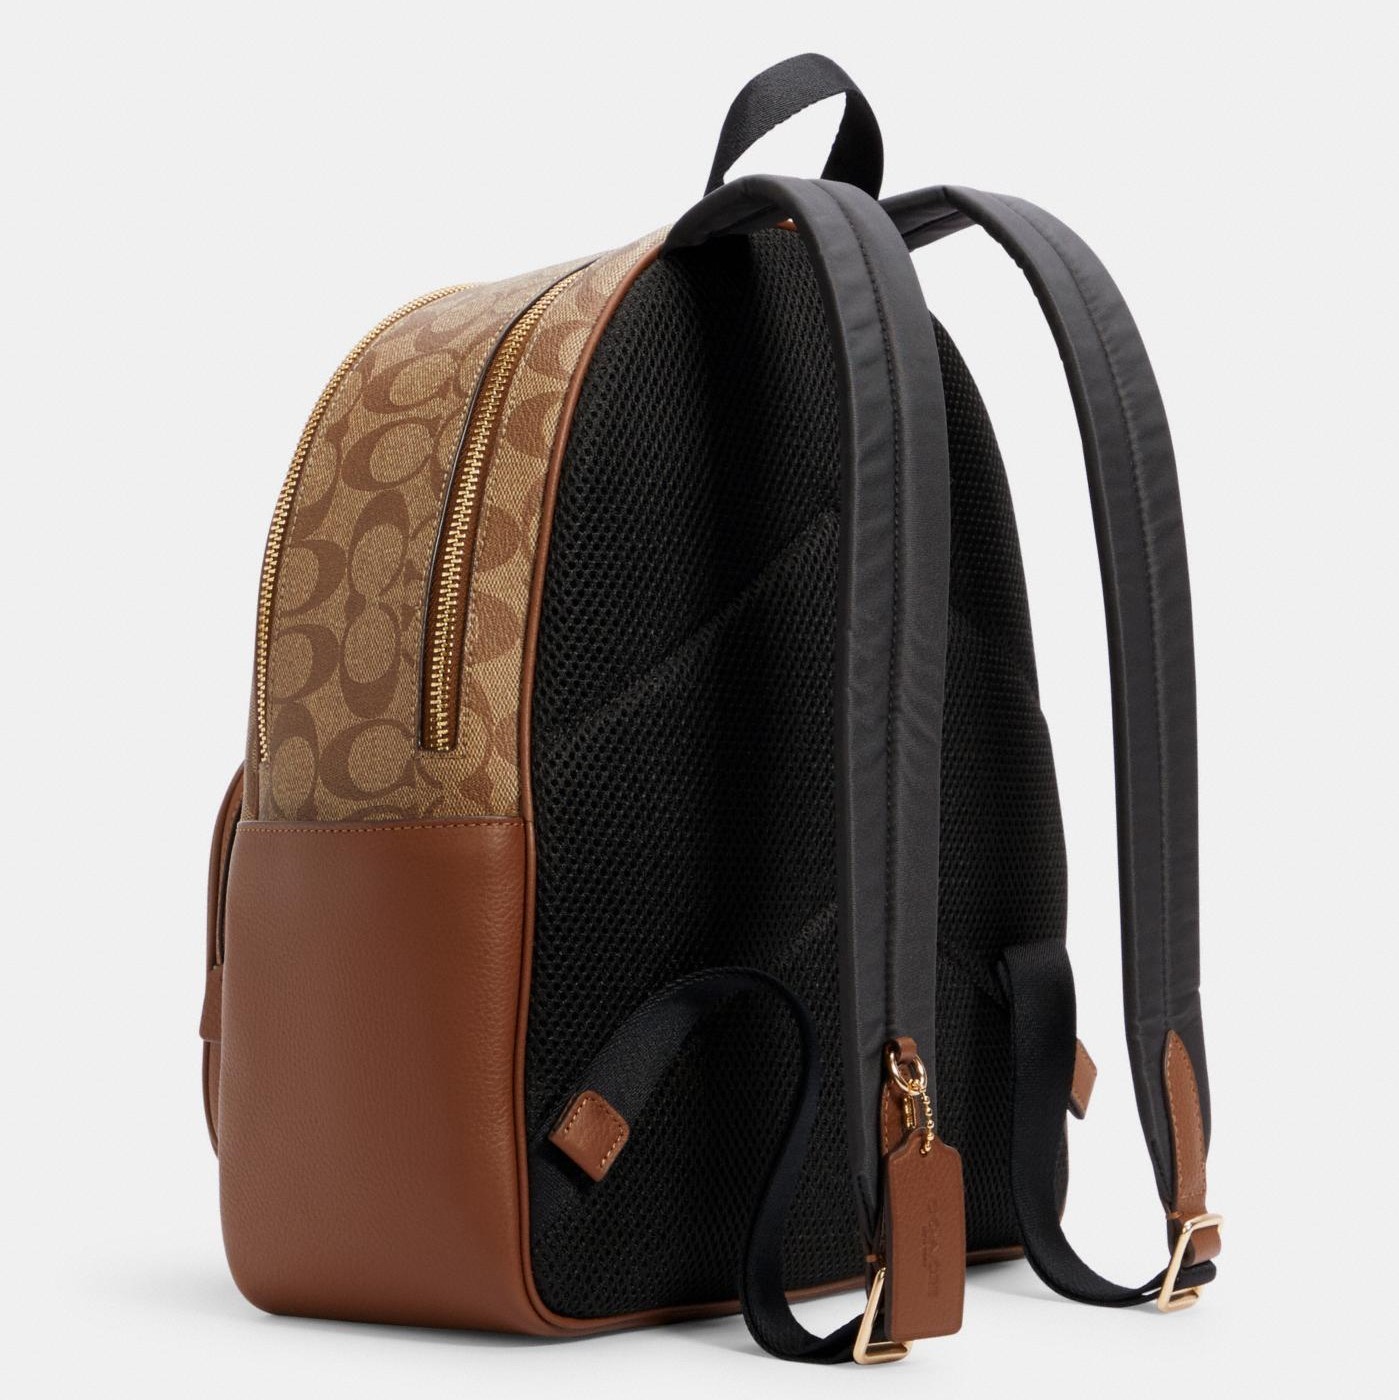 BALO NỮ COACH COURT BACKPACK IN SIGNATURE CANVAS 20